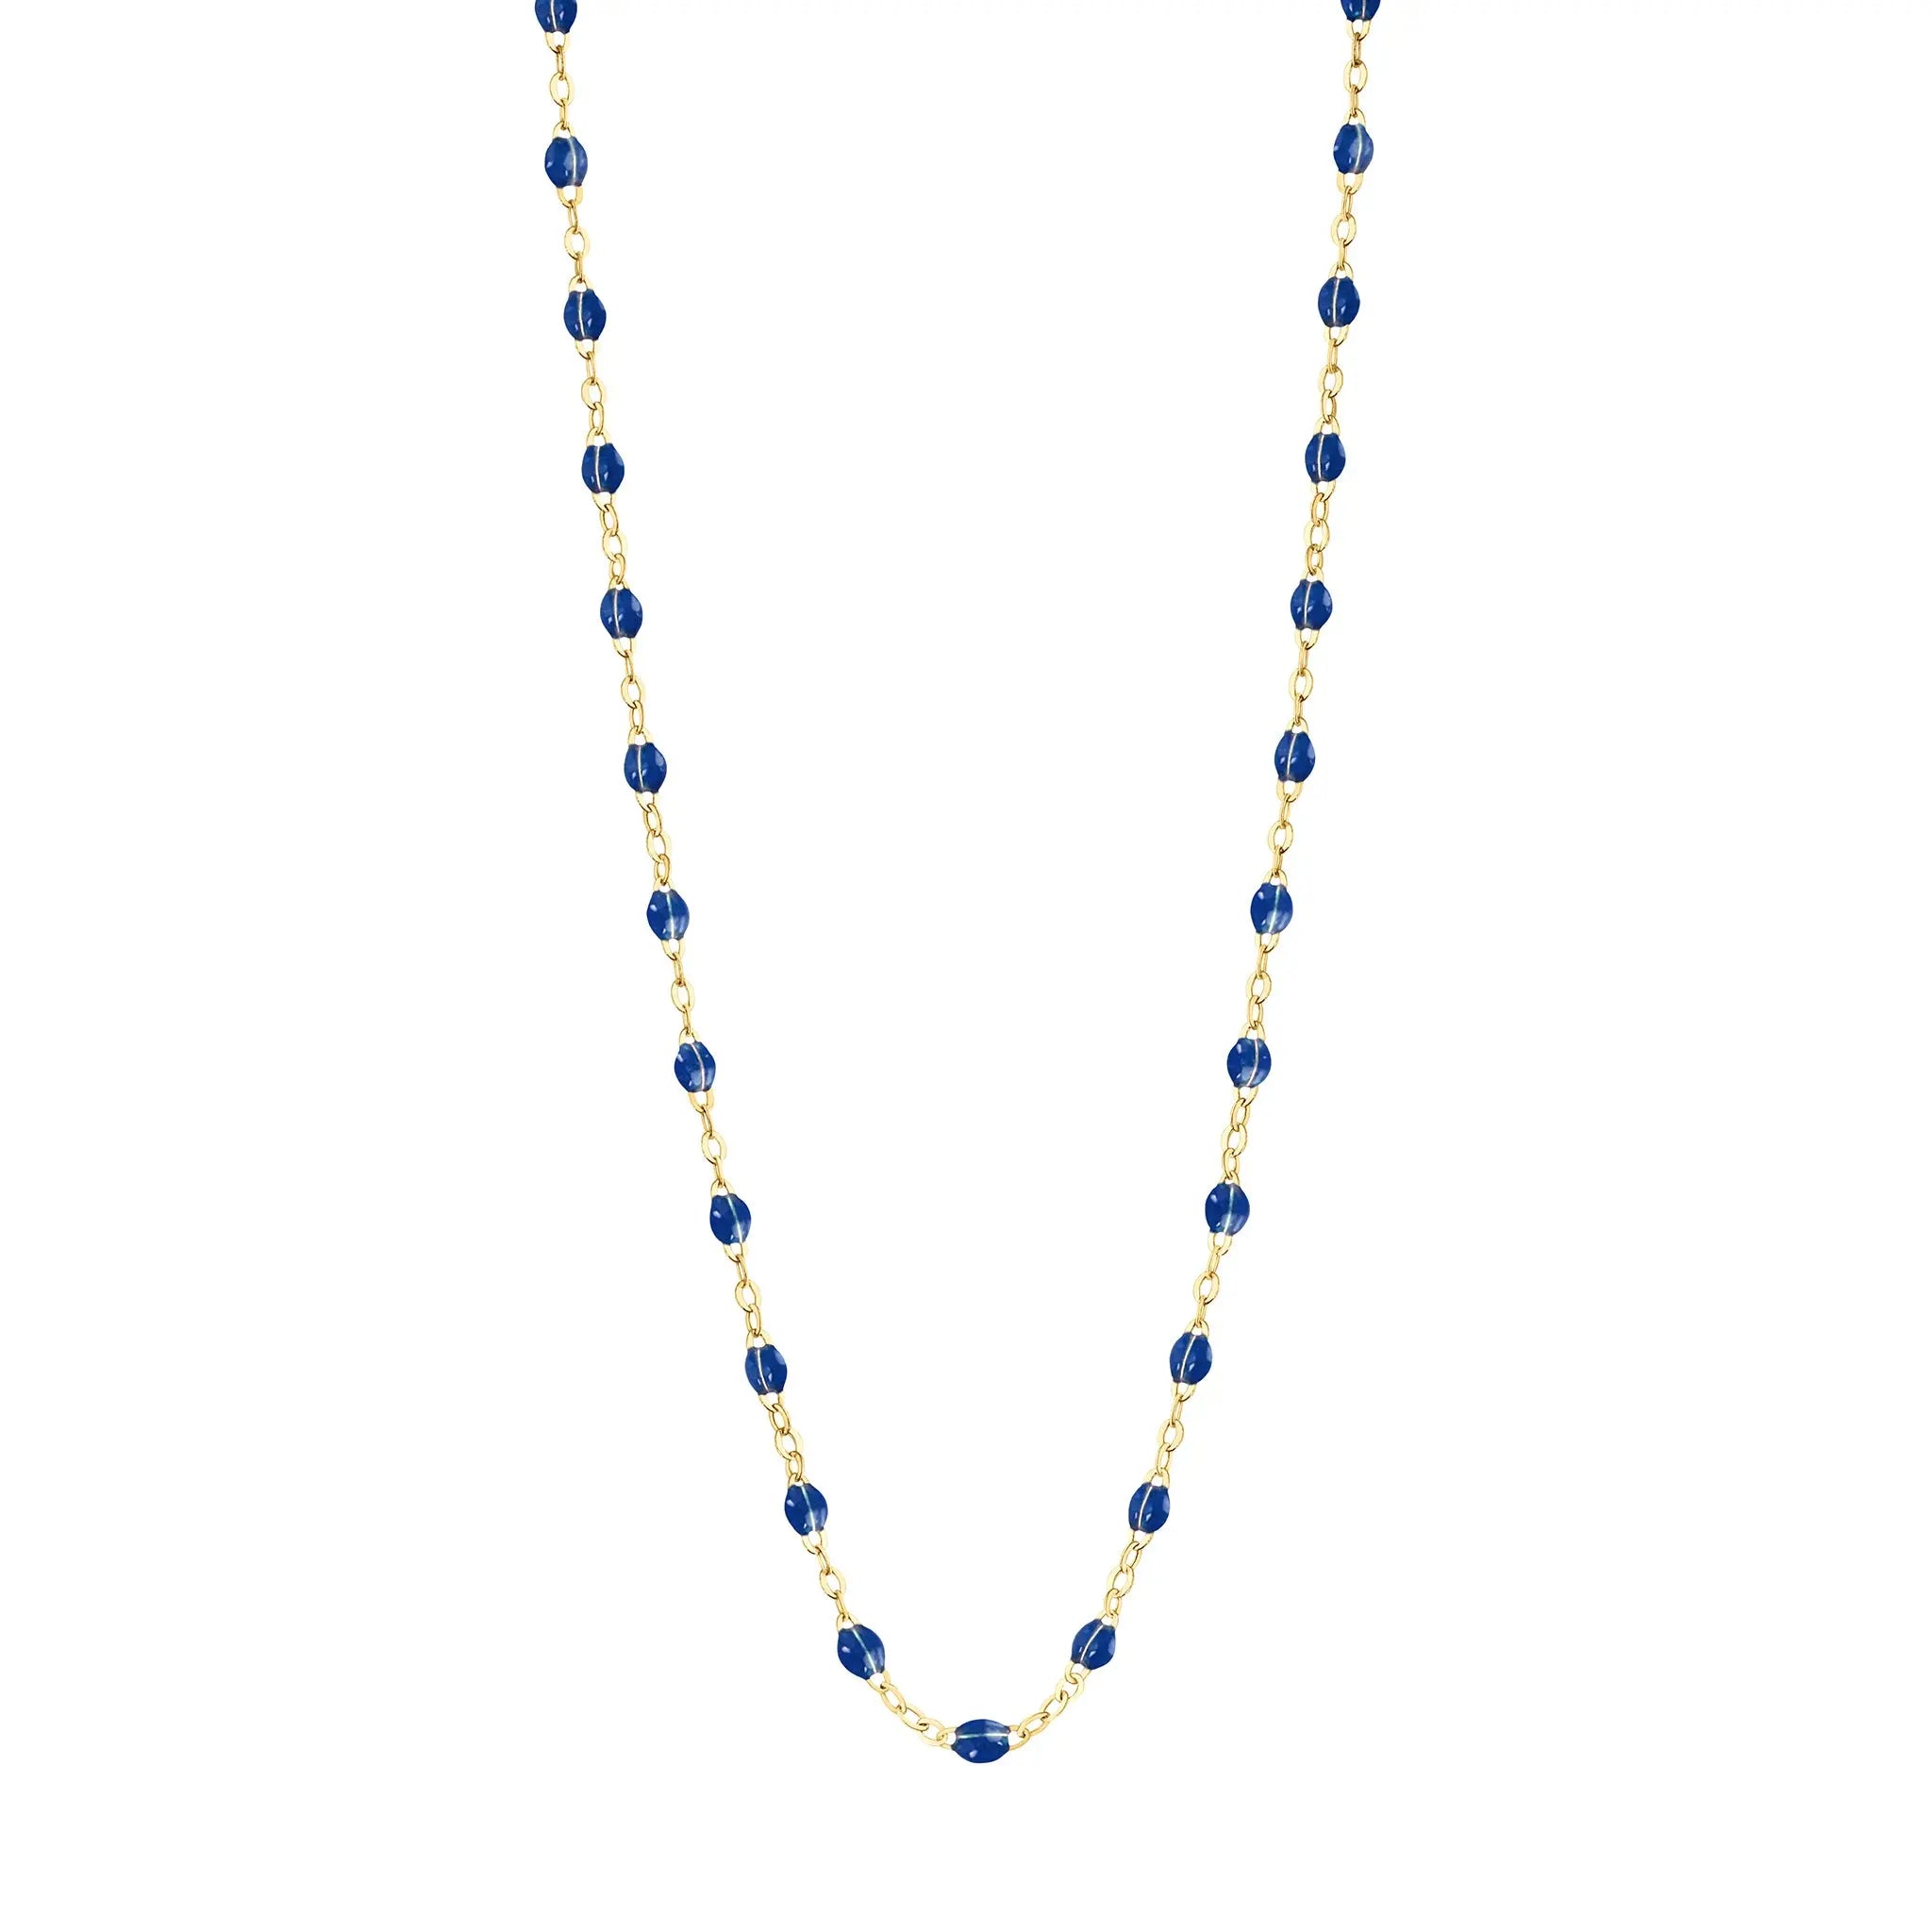 Stack you necklace layers with this versatile beaded chain! The Classic Gigi Necklace by gigi CLOZEAU features 18 carat yellow gold, and striking Lapis resin jewels for an everyday effortless appearance. Handcrafted in 18k yellow gold. The beads measure 1.50mm in diameter and is finished with a spring ring clasp. The length is 16.5 inches.